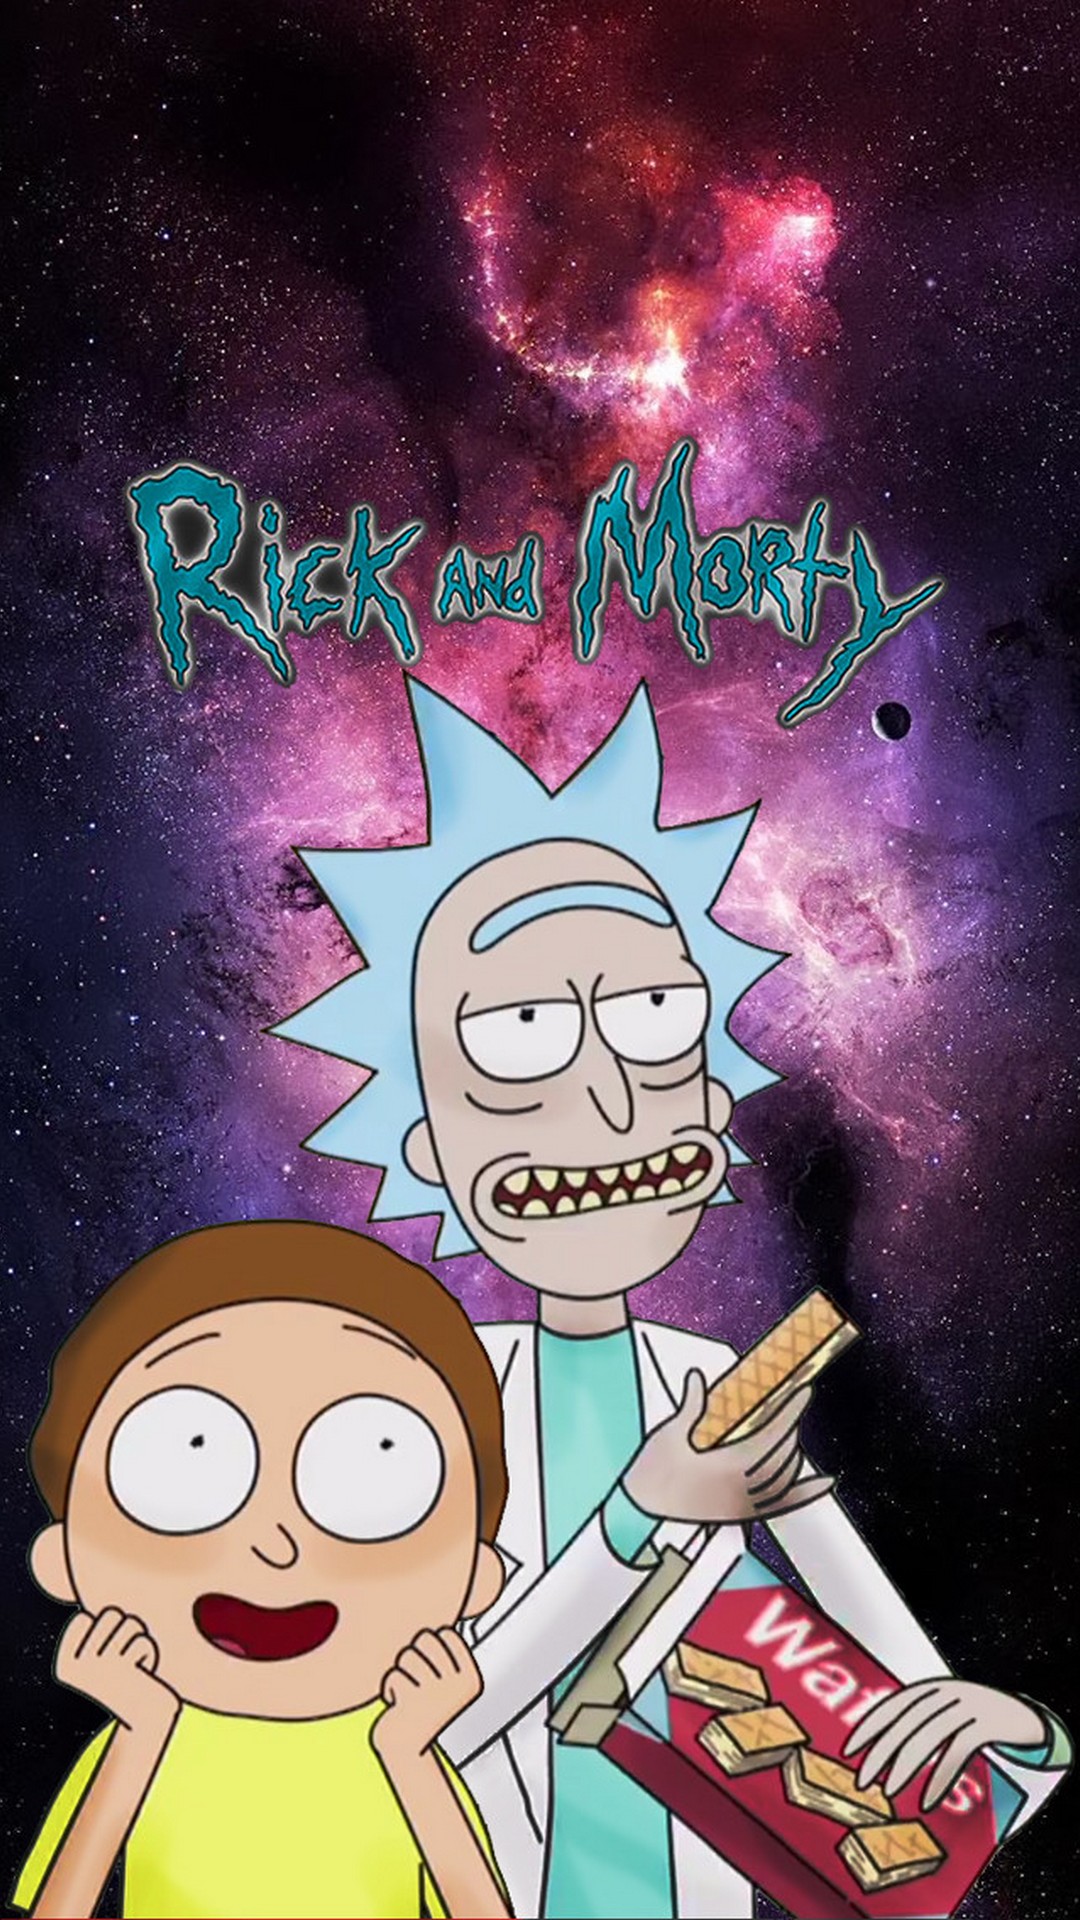 Rick and Morty iPhone 8 Wallpaper with image resolution 1080x1920 pixel. You can use this wallpaper as background for your desktop Computer Screensavers, Android or iPhone smartphones